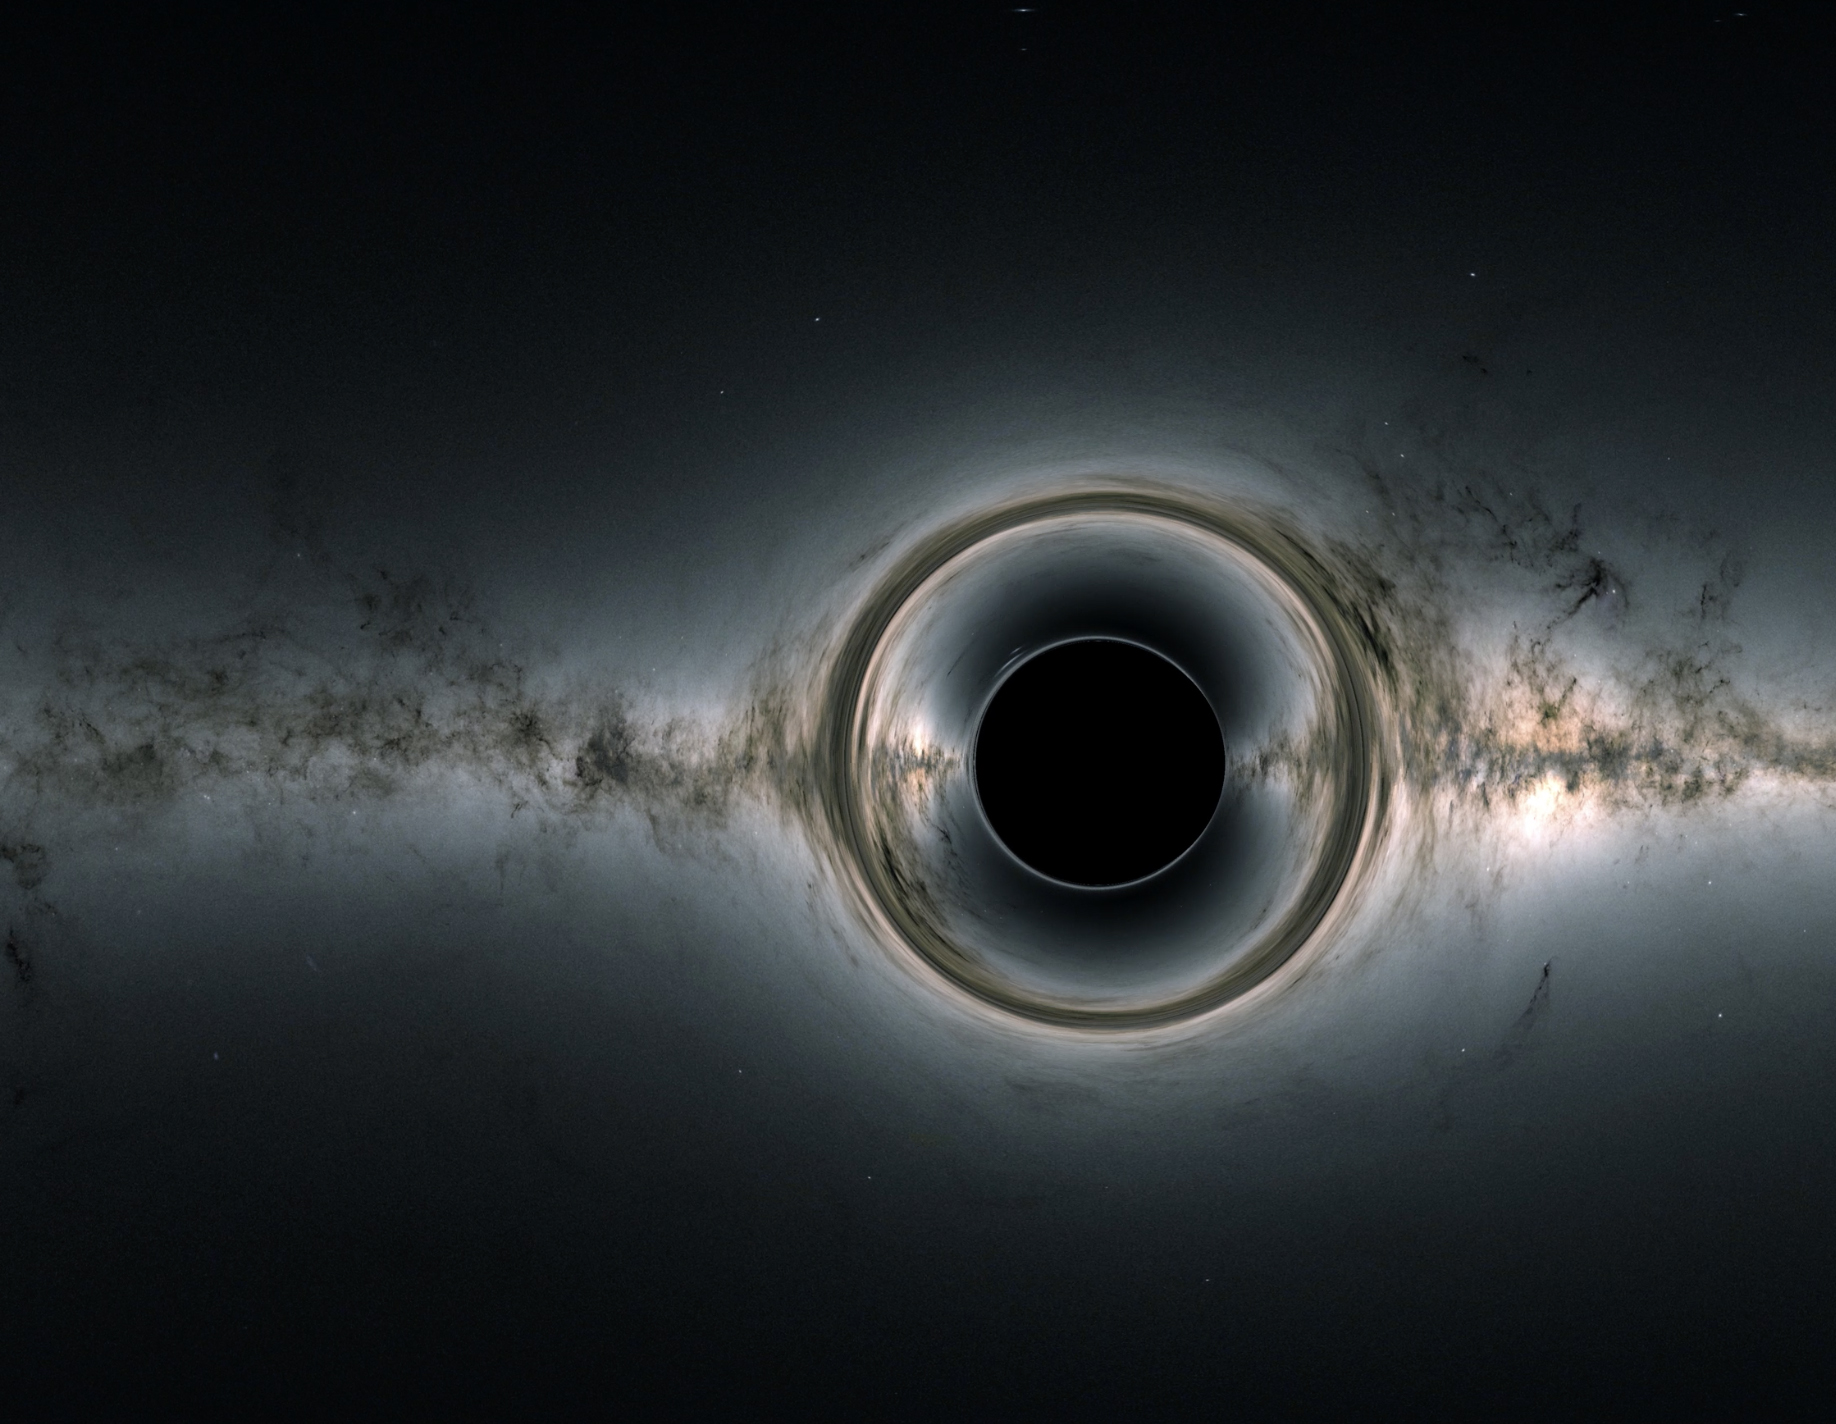 What's Inside a Black Hole? | Live Science